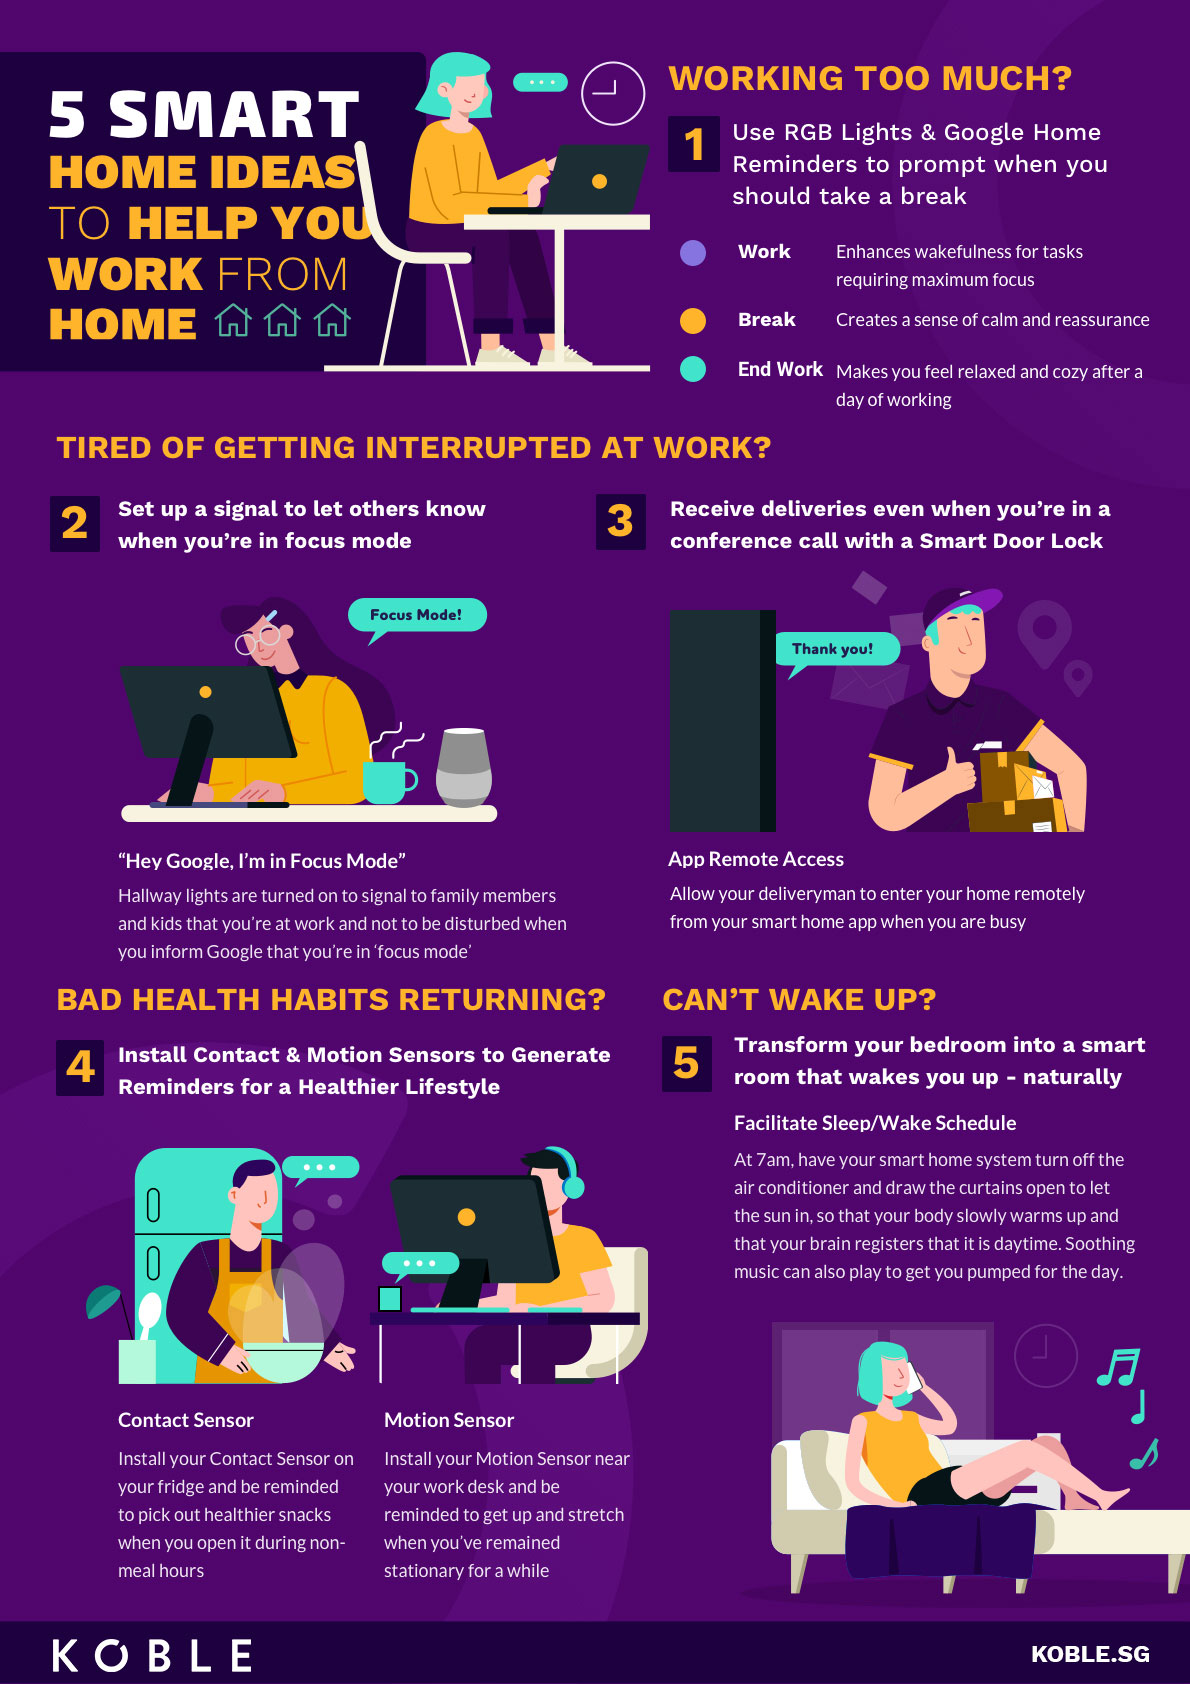 5 Smart home idea to work from home